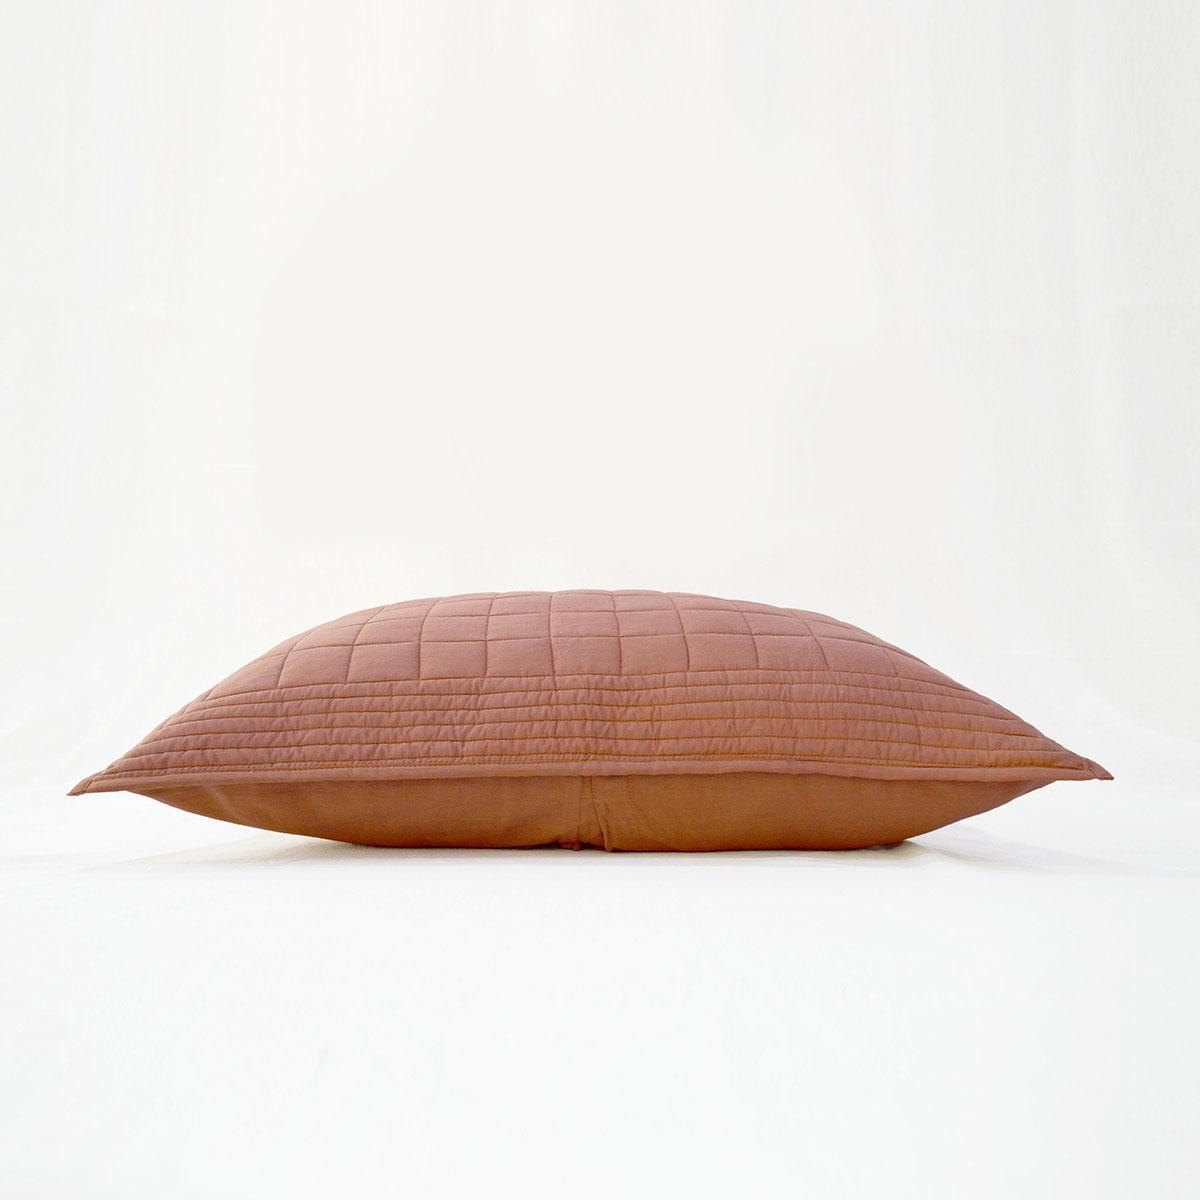 CLAY BROWN cotton Quilted pillow cases, Sizes available